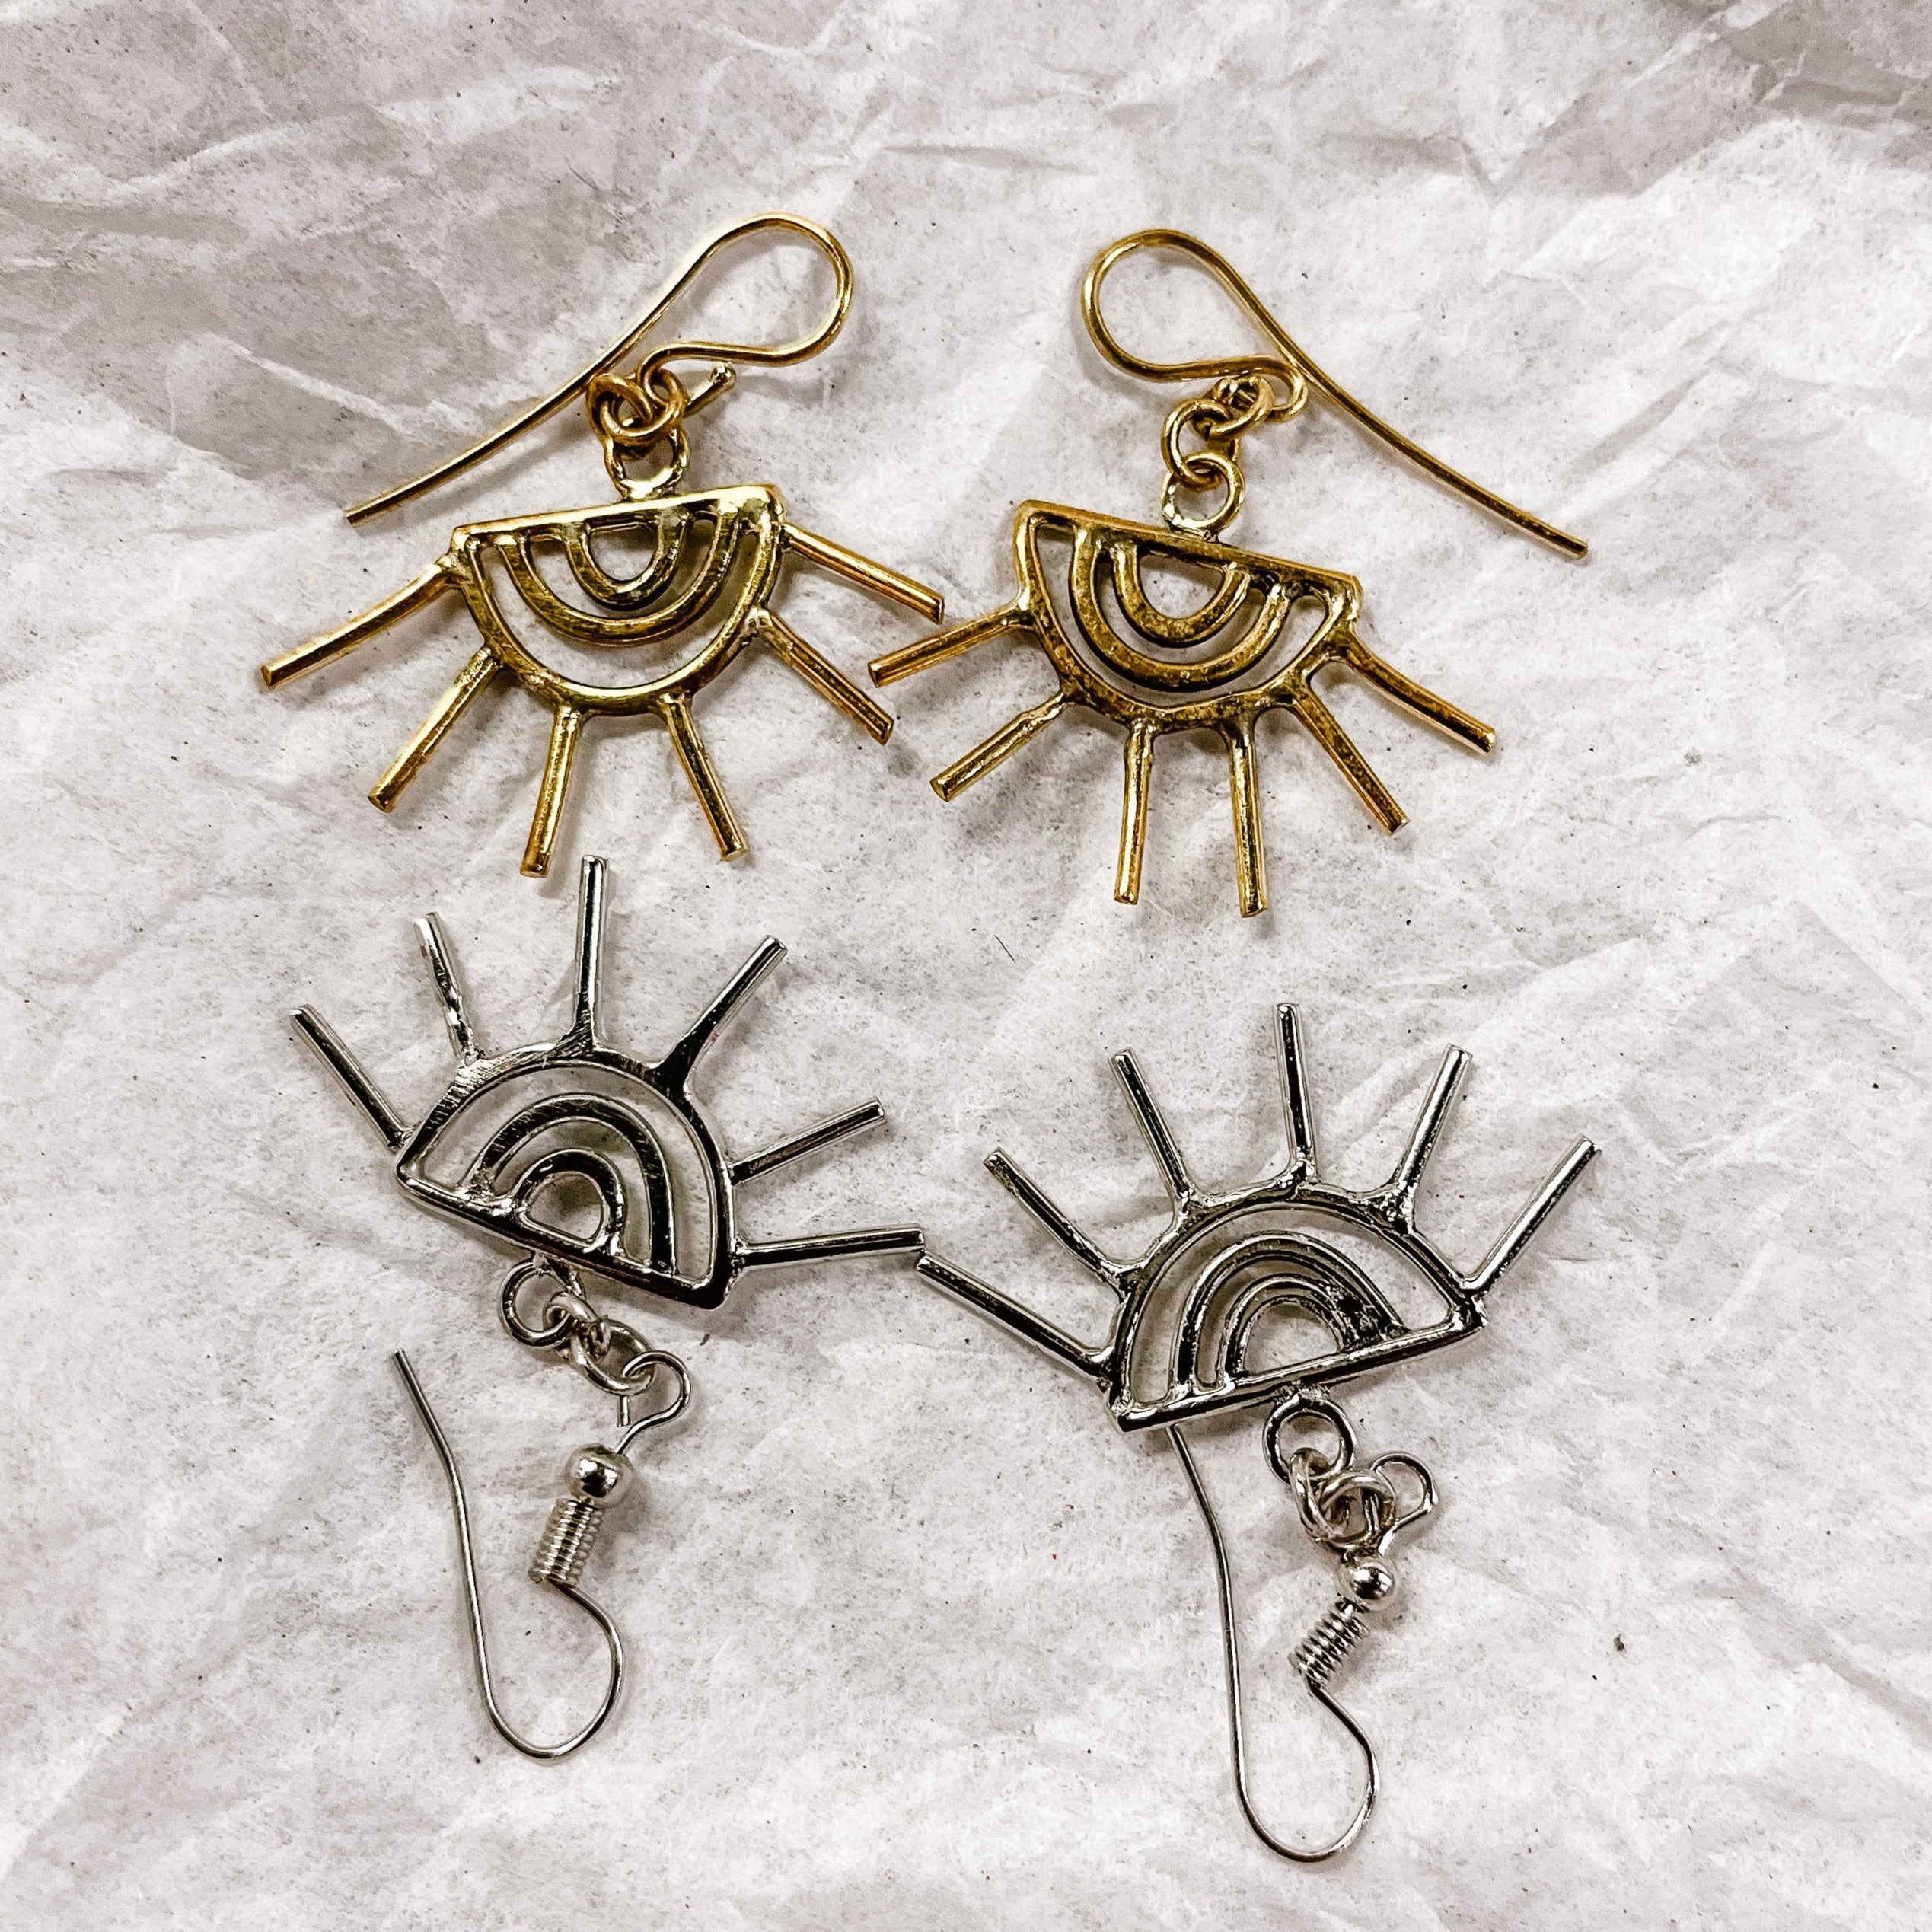 JustOne's brass and silver eye shaped earrings with eyelashes sticking out of the earring, handcrafted in Kenya